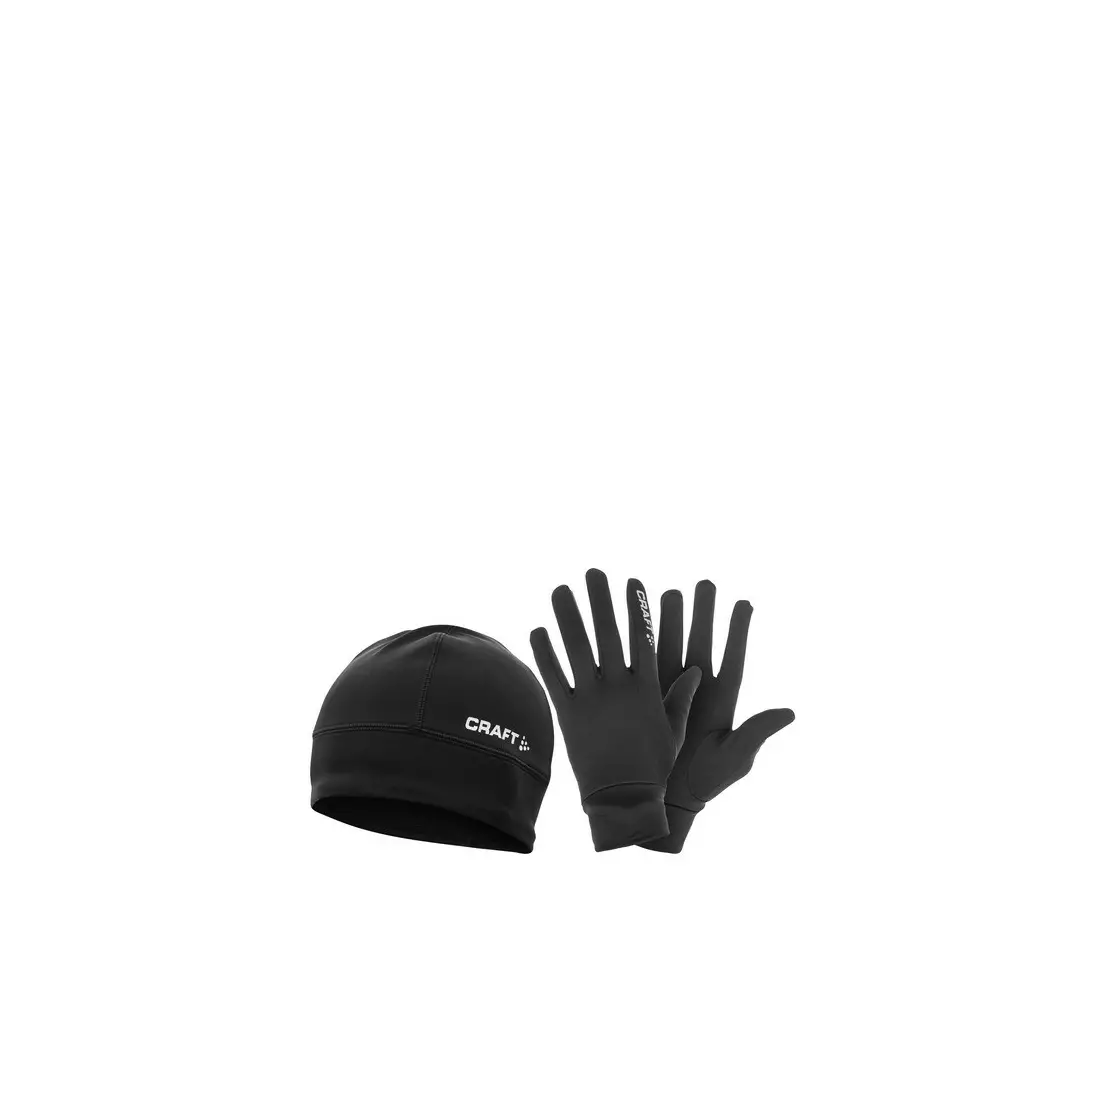 CRAFT 1902959-9999 Thermal hat and gloves set